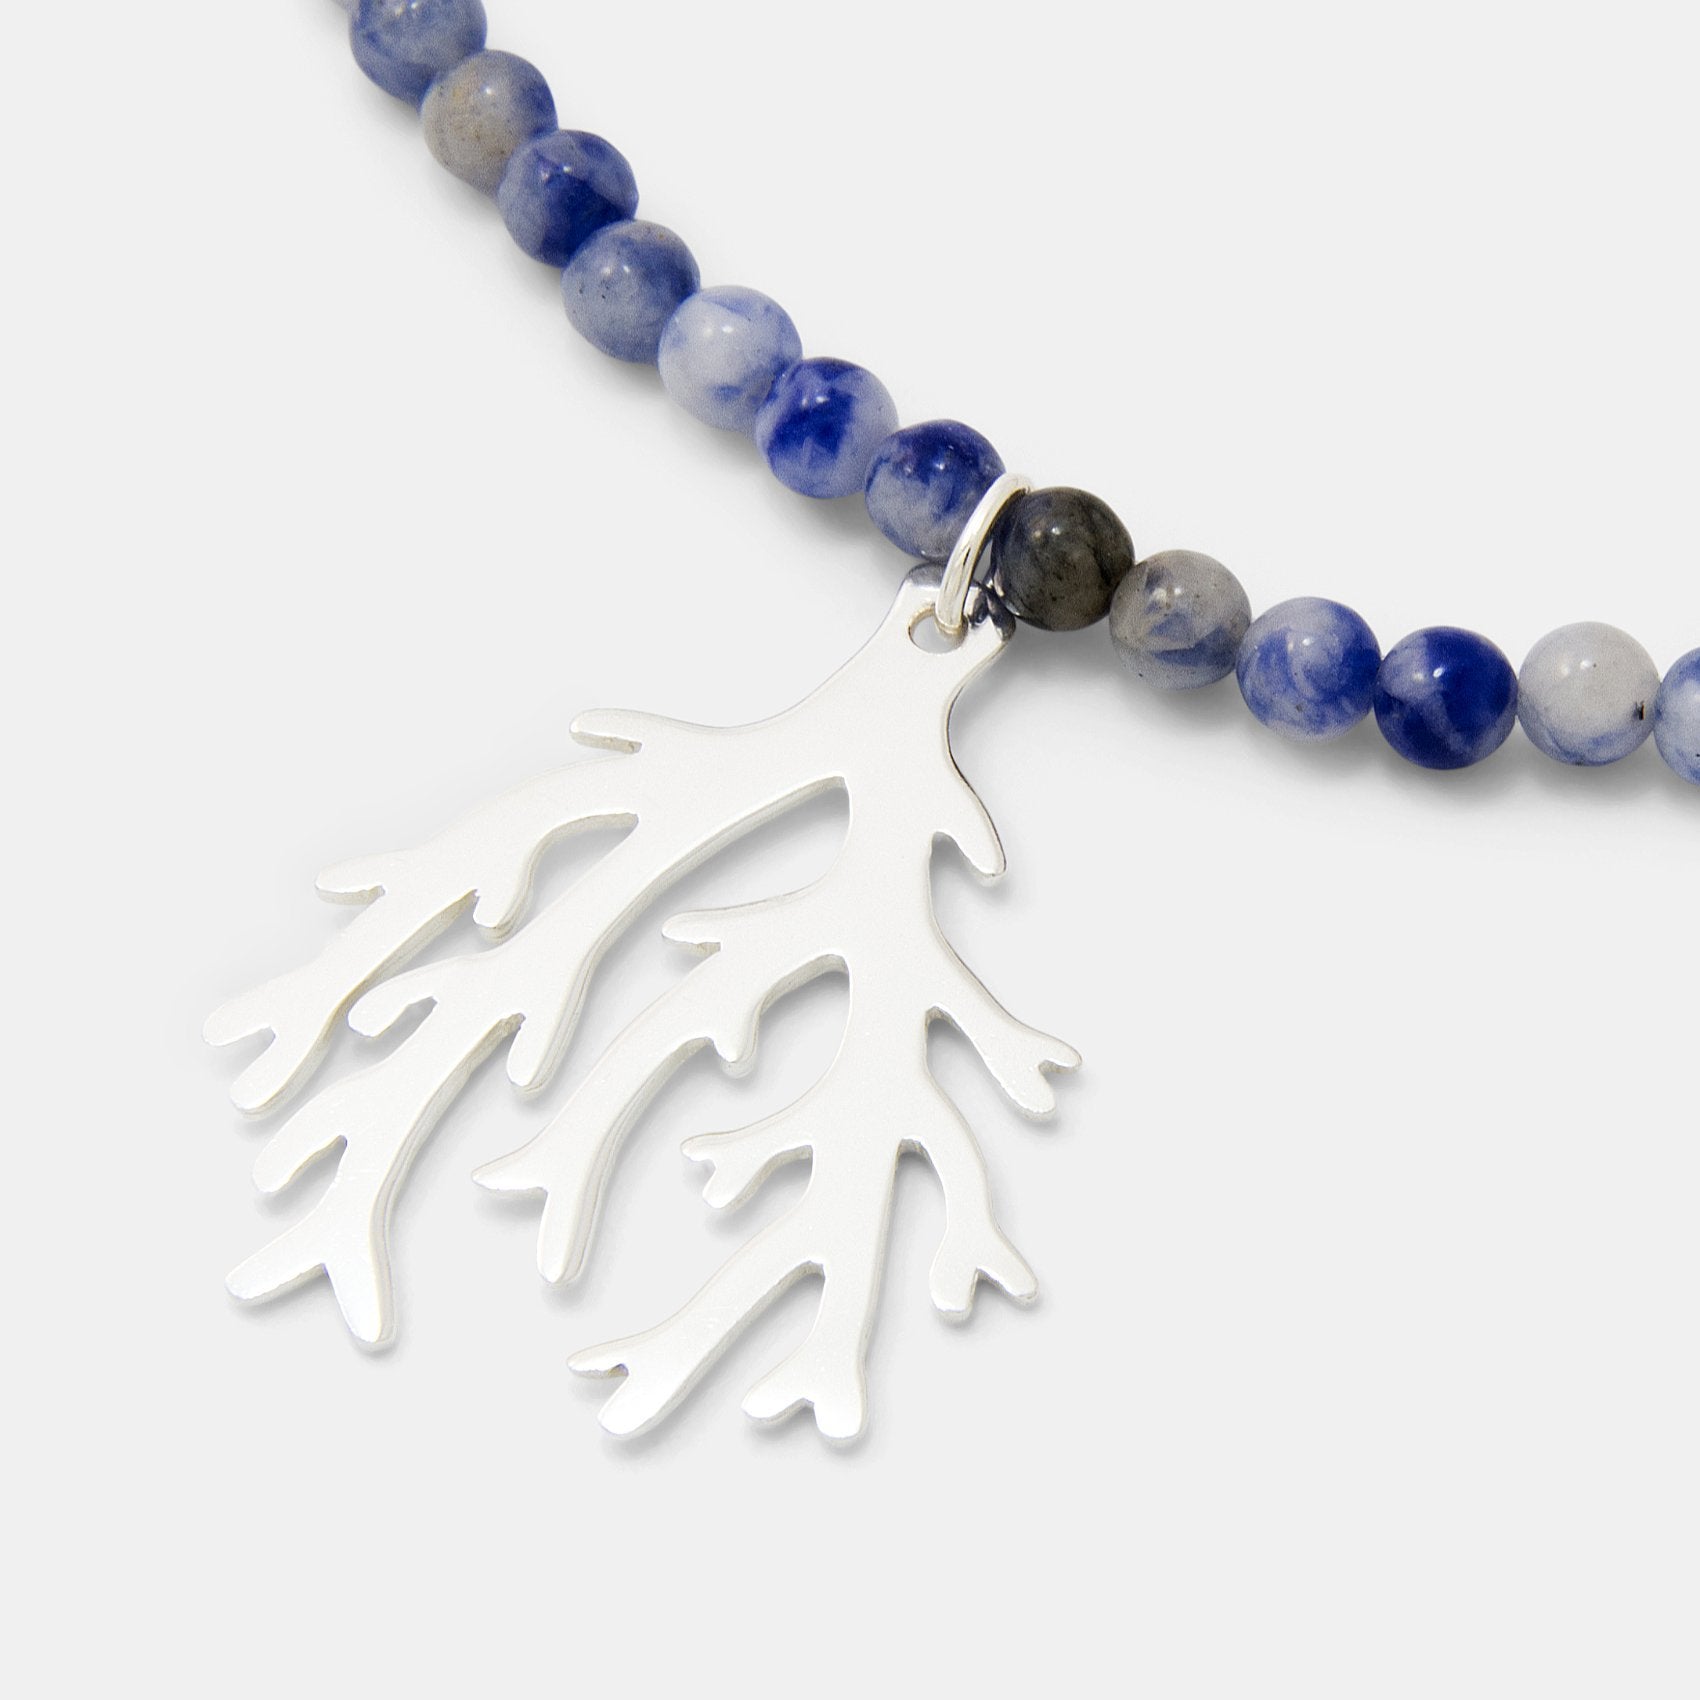 Branch coral on sodalite beaded necklace - Simone Walsh Jewellery Australia